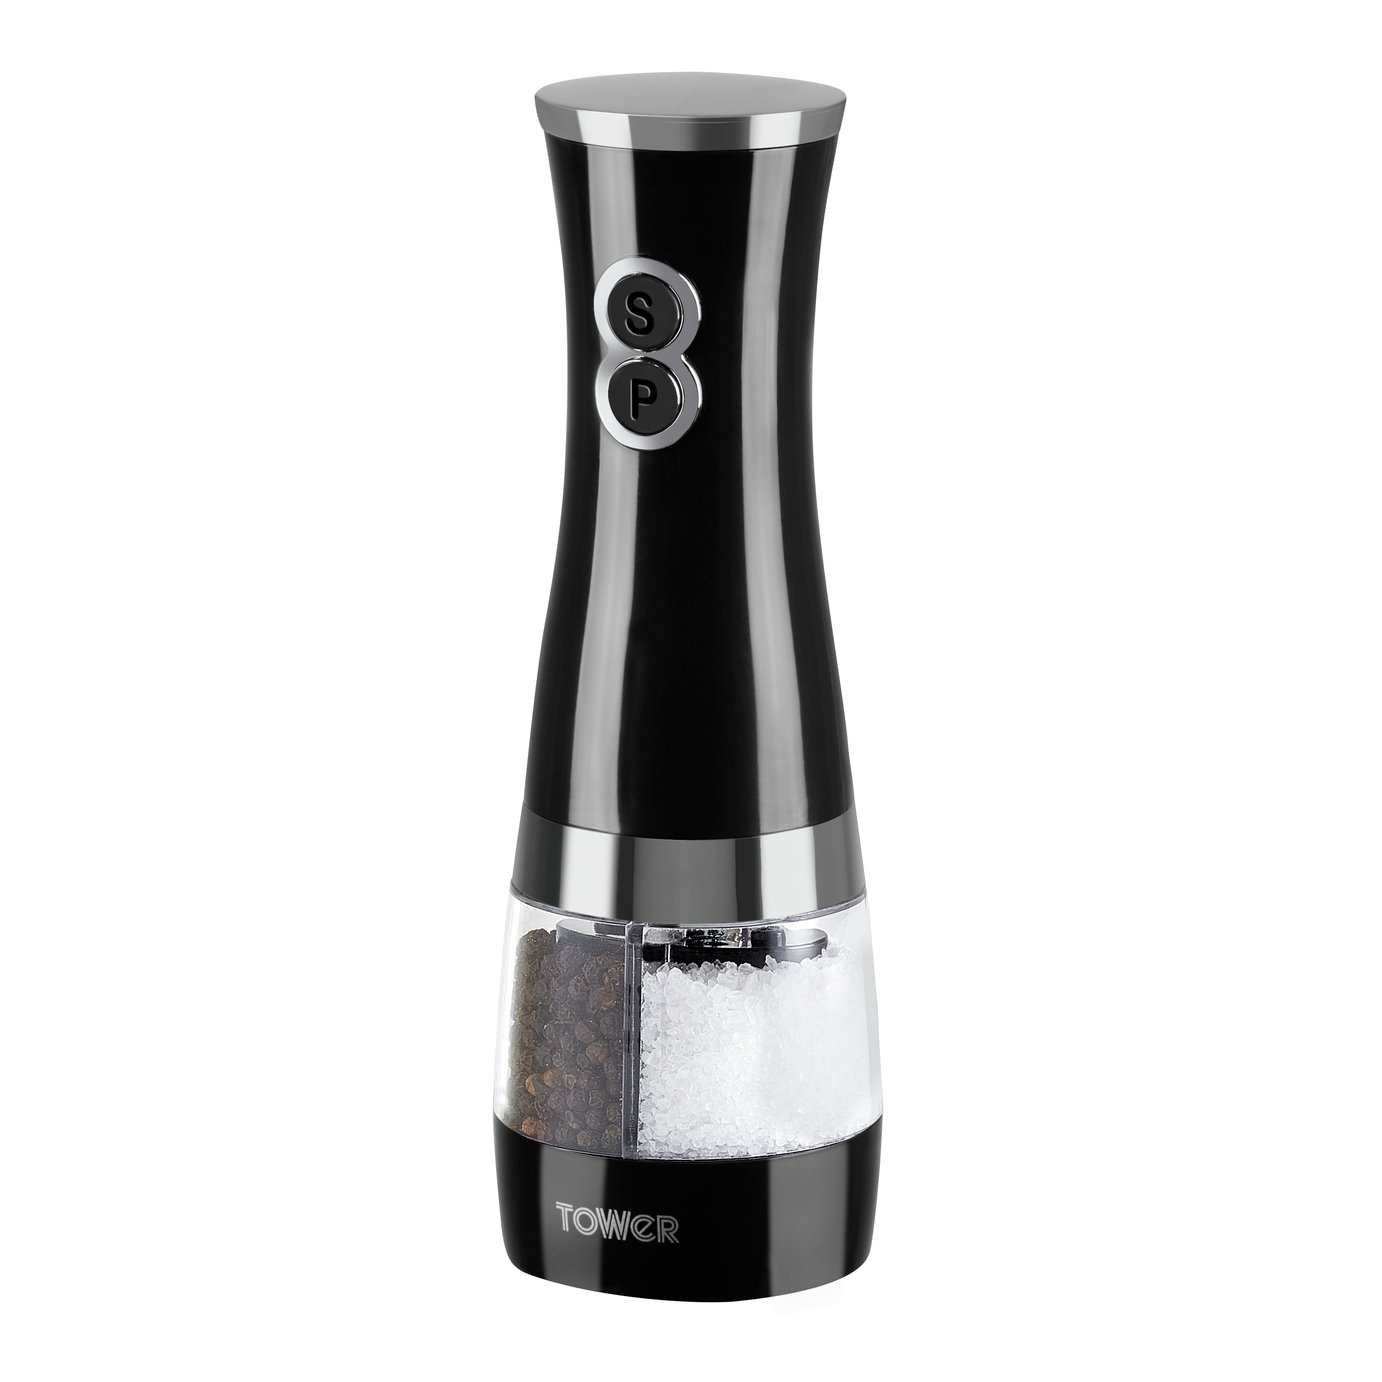 Tower Duo Salt and Pepper Mill - Black